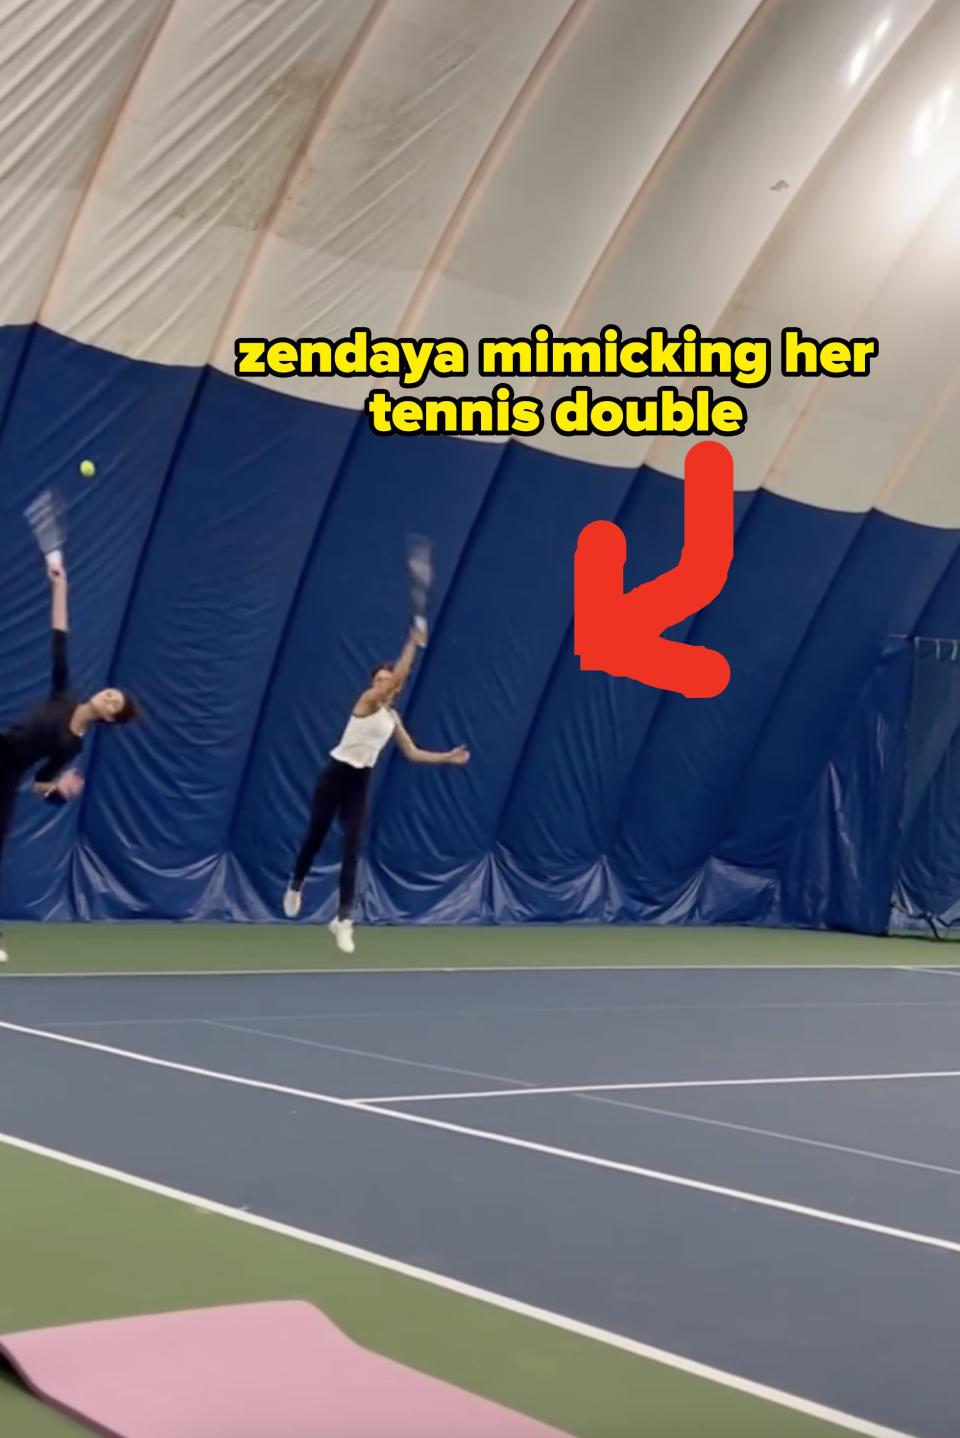 Two people playing tennis indoors, one reaching for an overhead shot